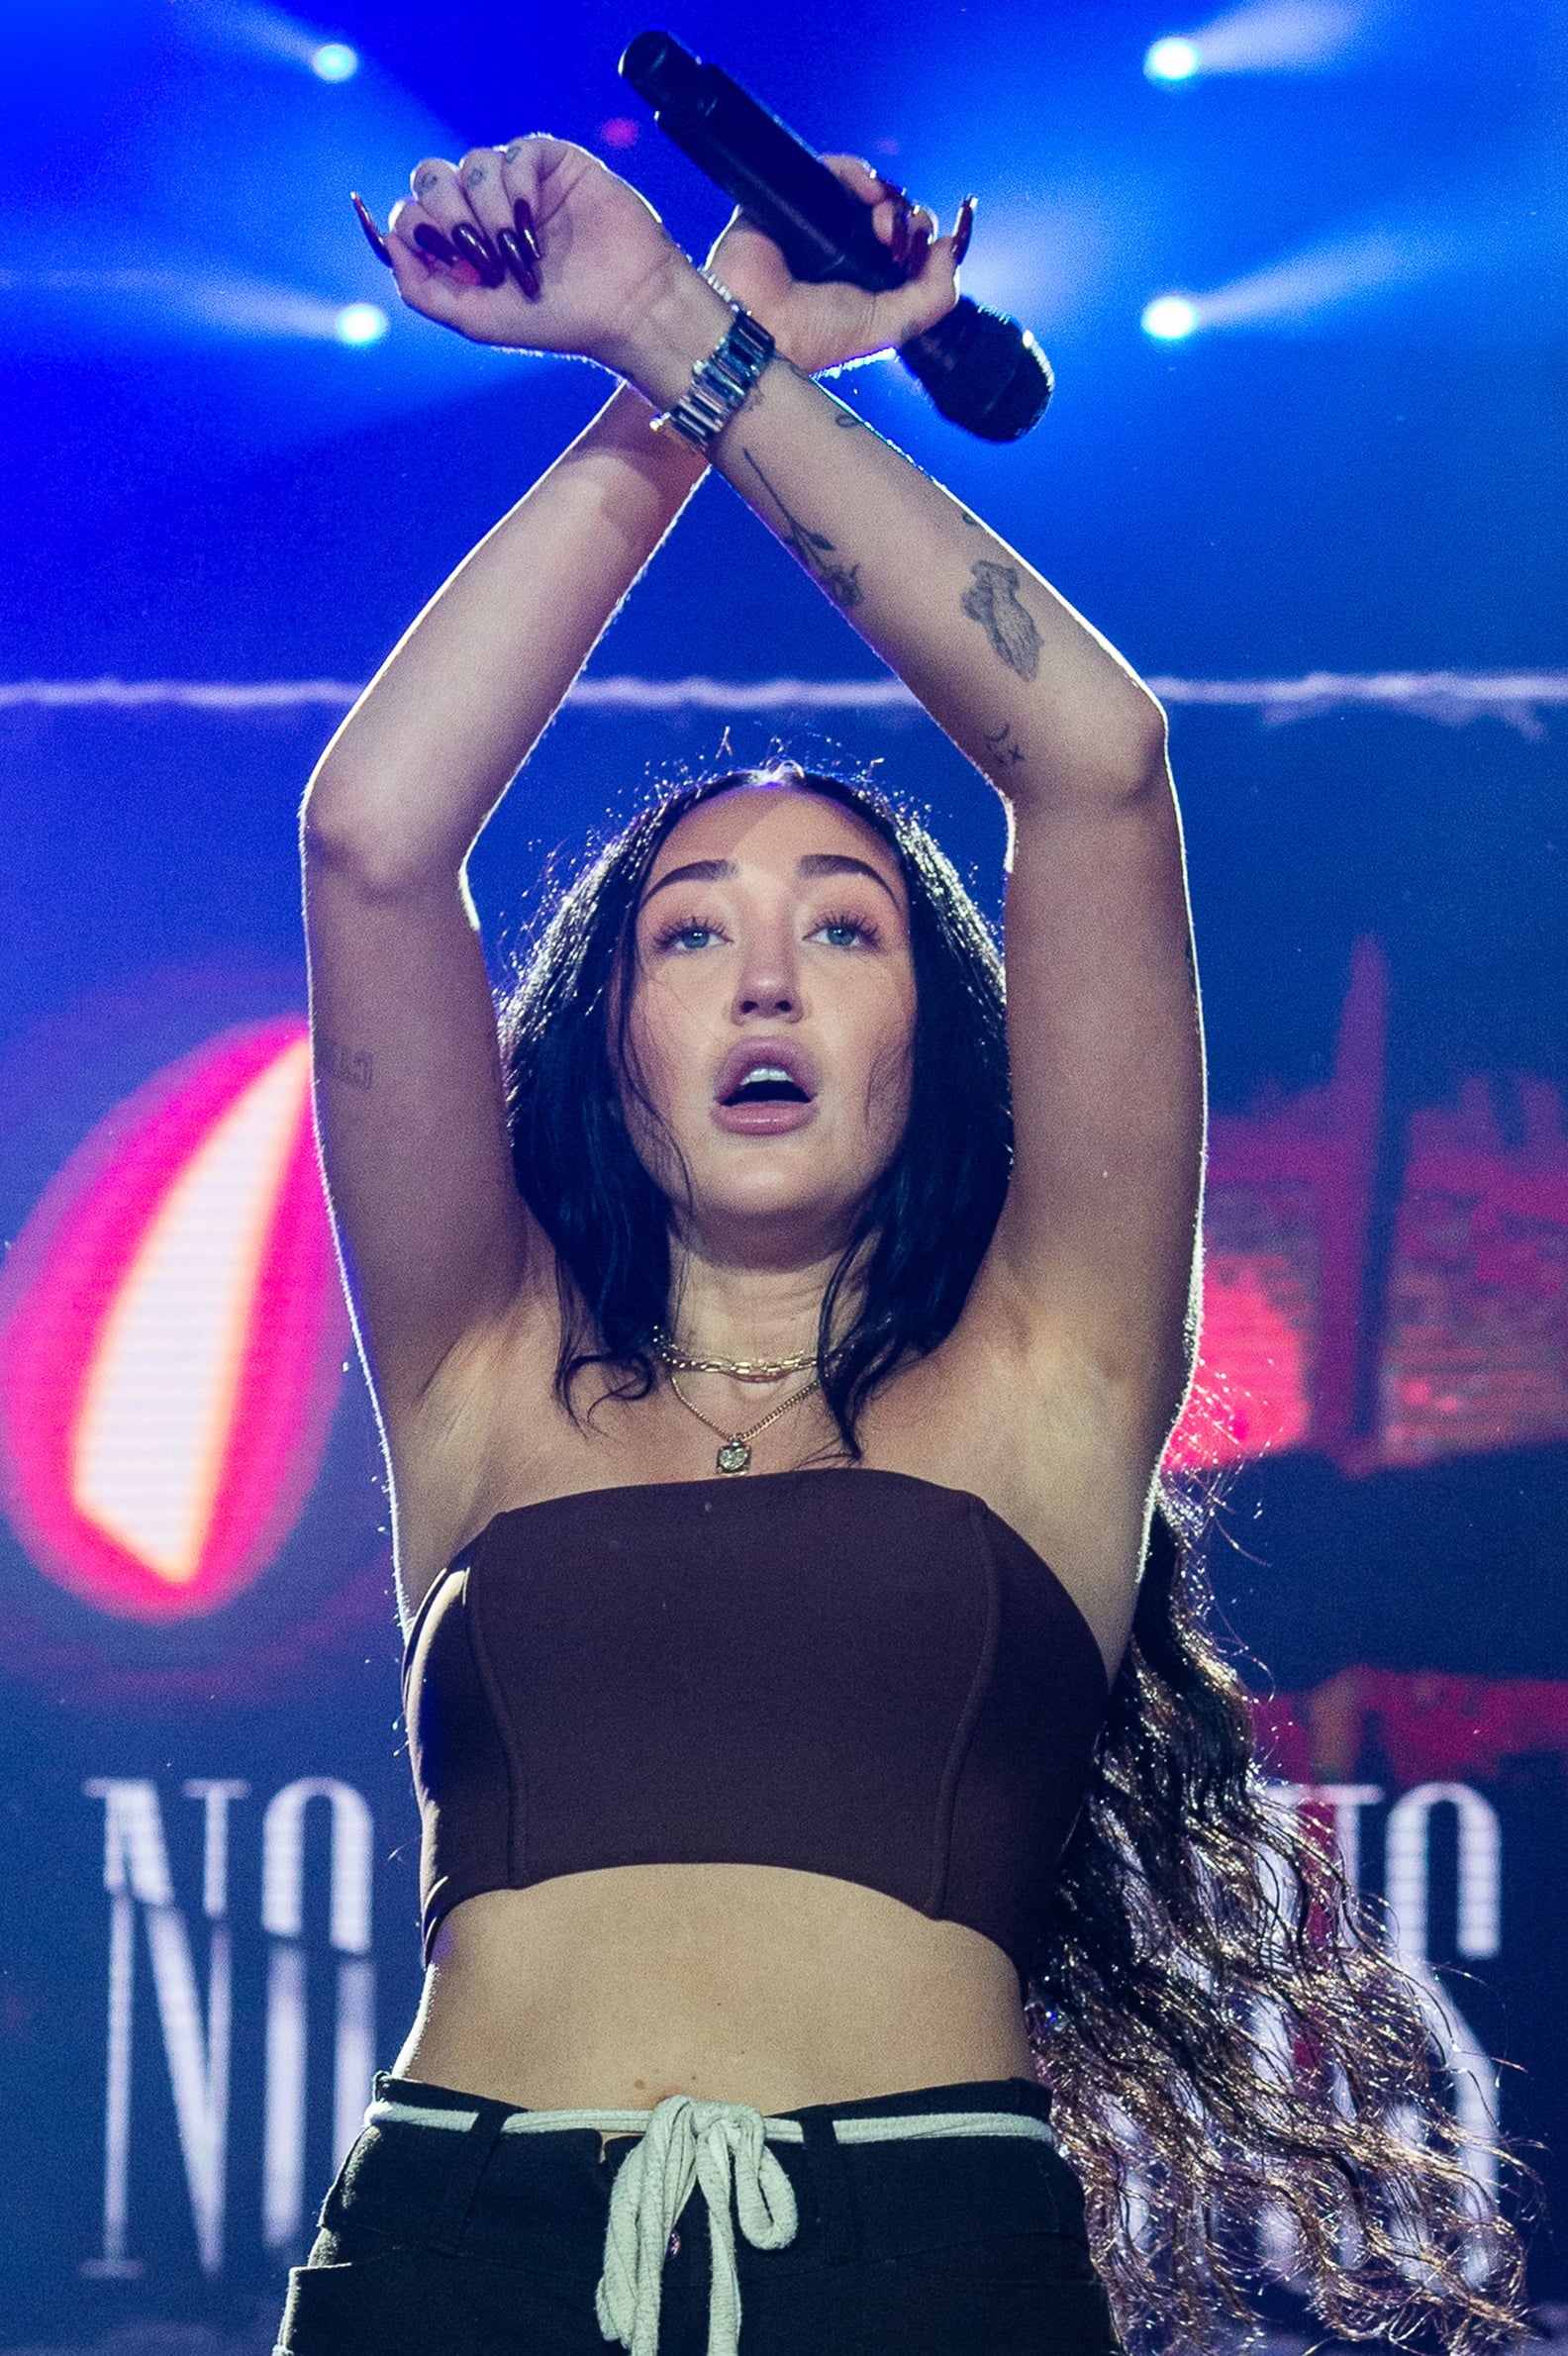 Noah Cyrus's 35+ Tattoos: What Do They Mean? | POPSUGAR Beauty